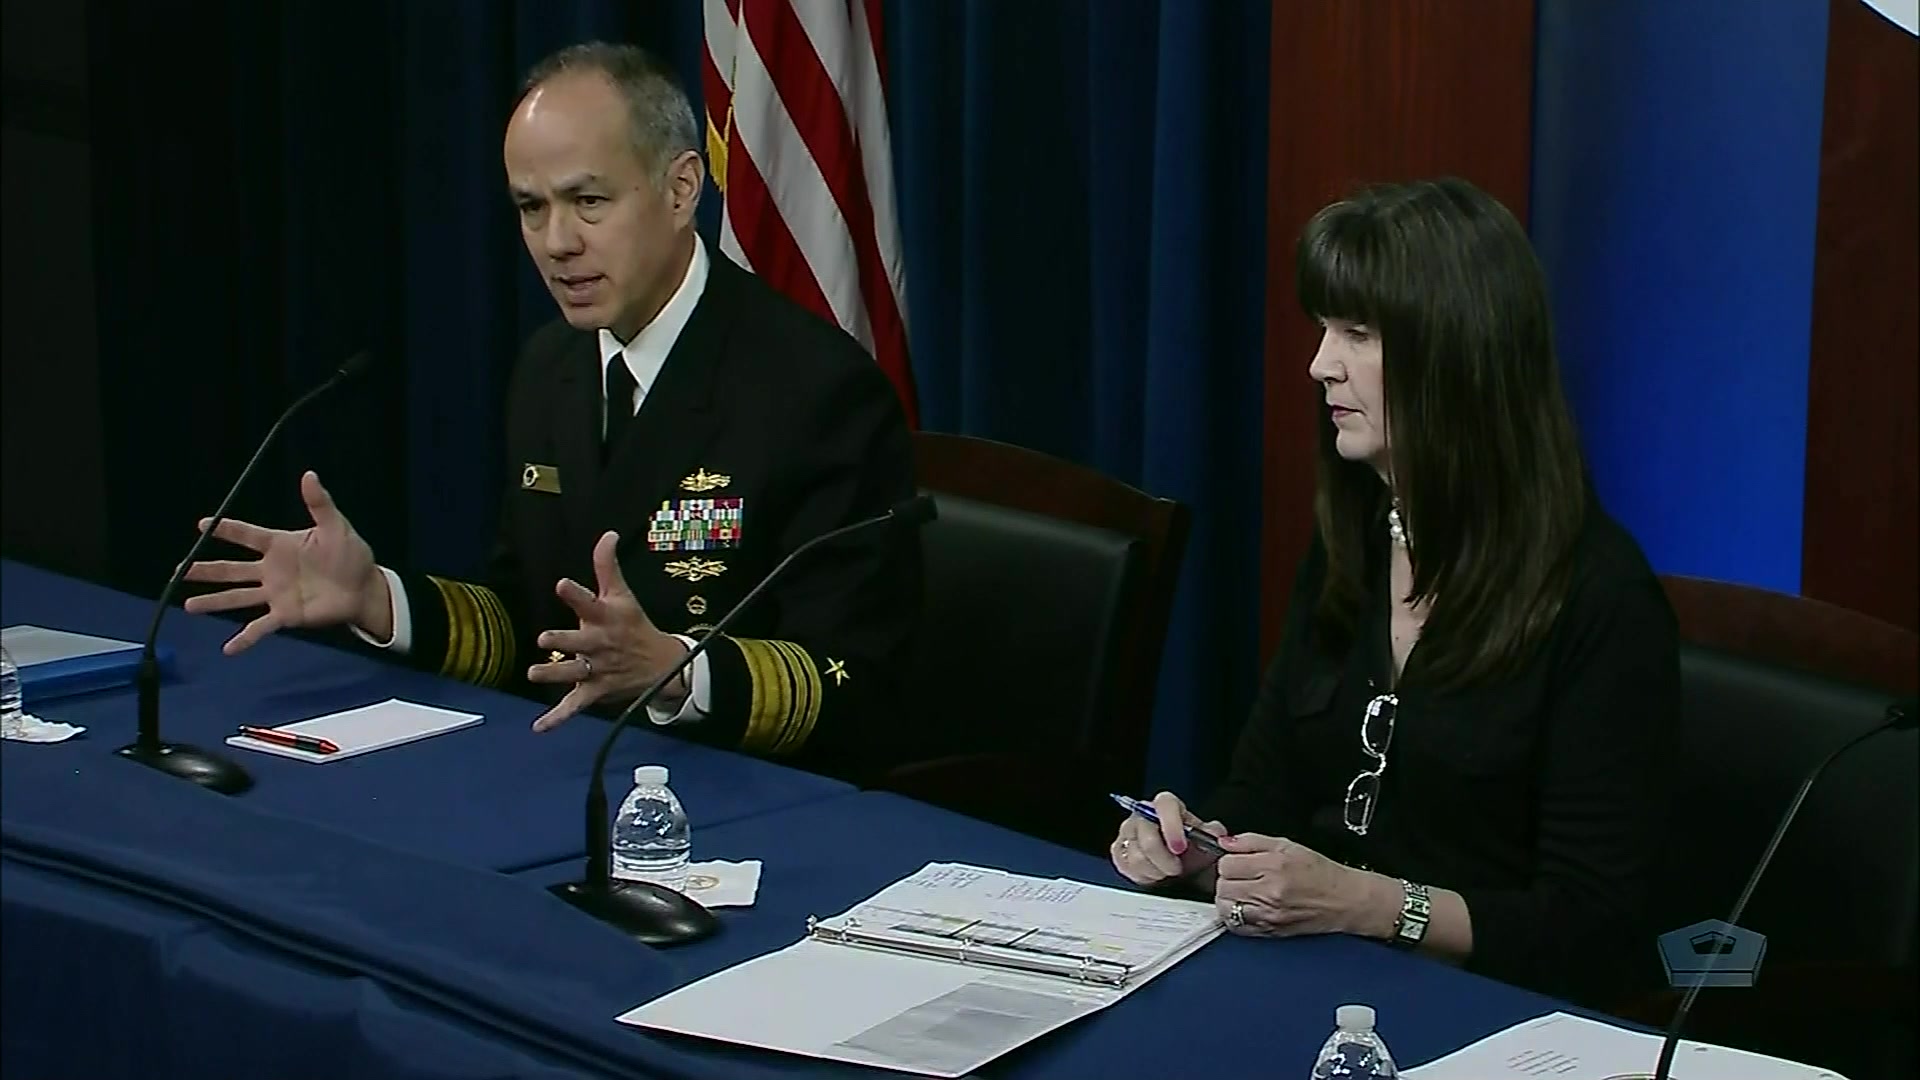 Navy Vice Adm. Jon A. Hill, director, Missile Defense Agency, and Michelle C. Atkinson, director for operations briefs the news media on President Joe Biden’s fiscal 2022 defense budget, May 28, 2021.